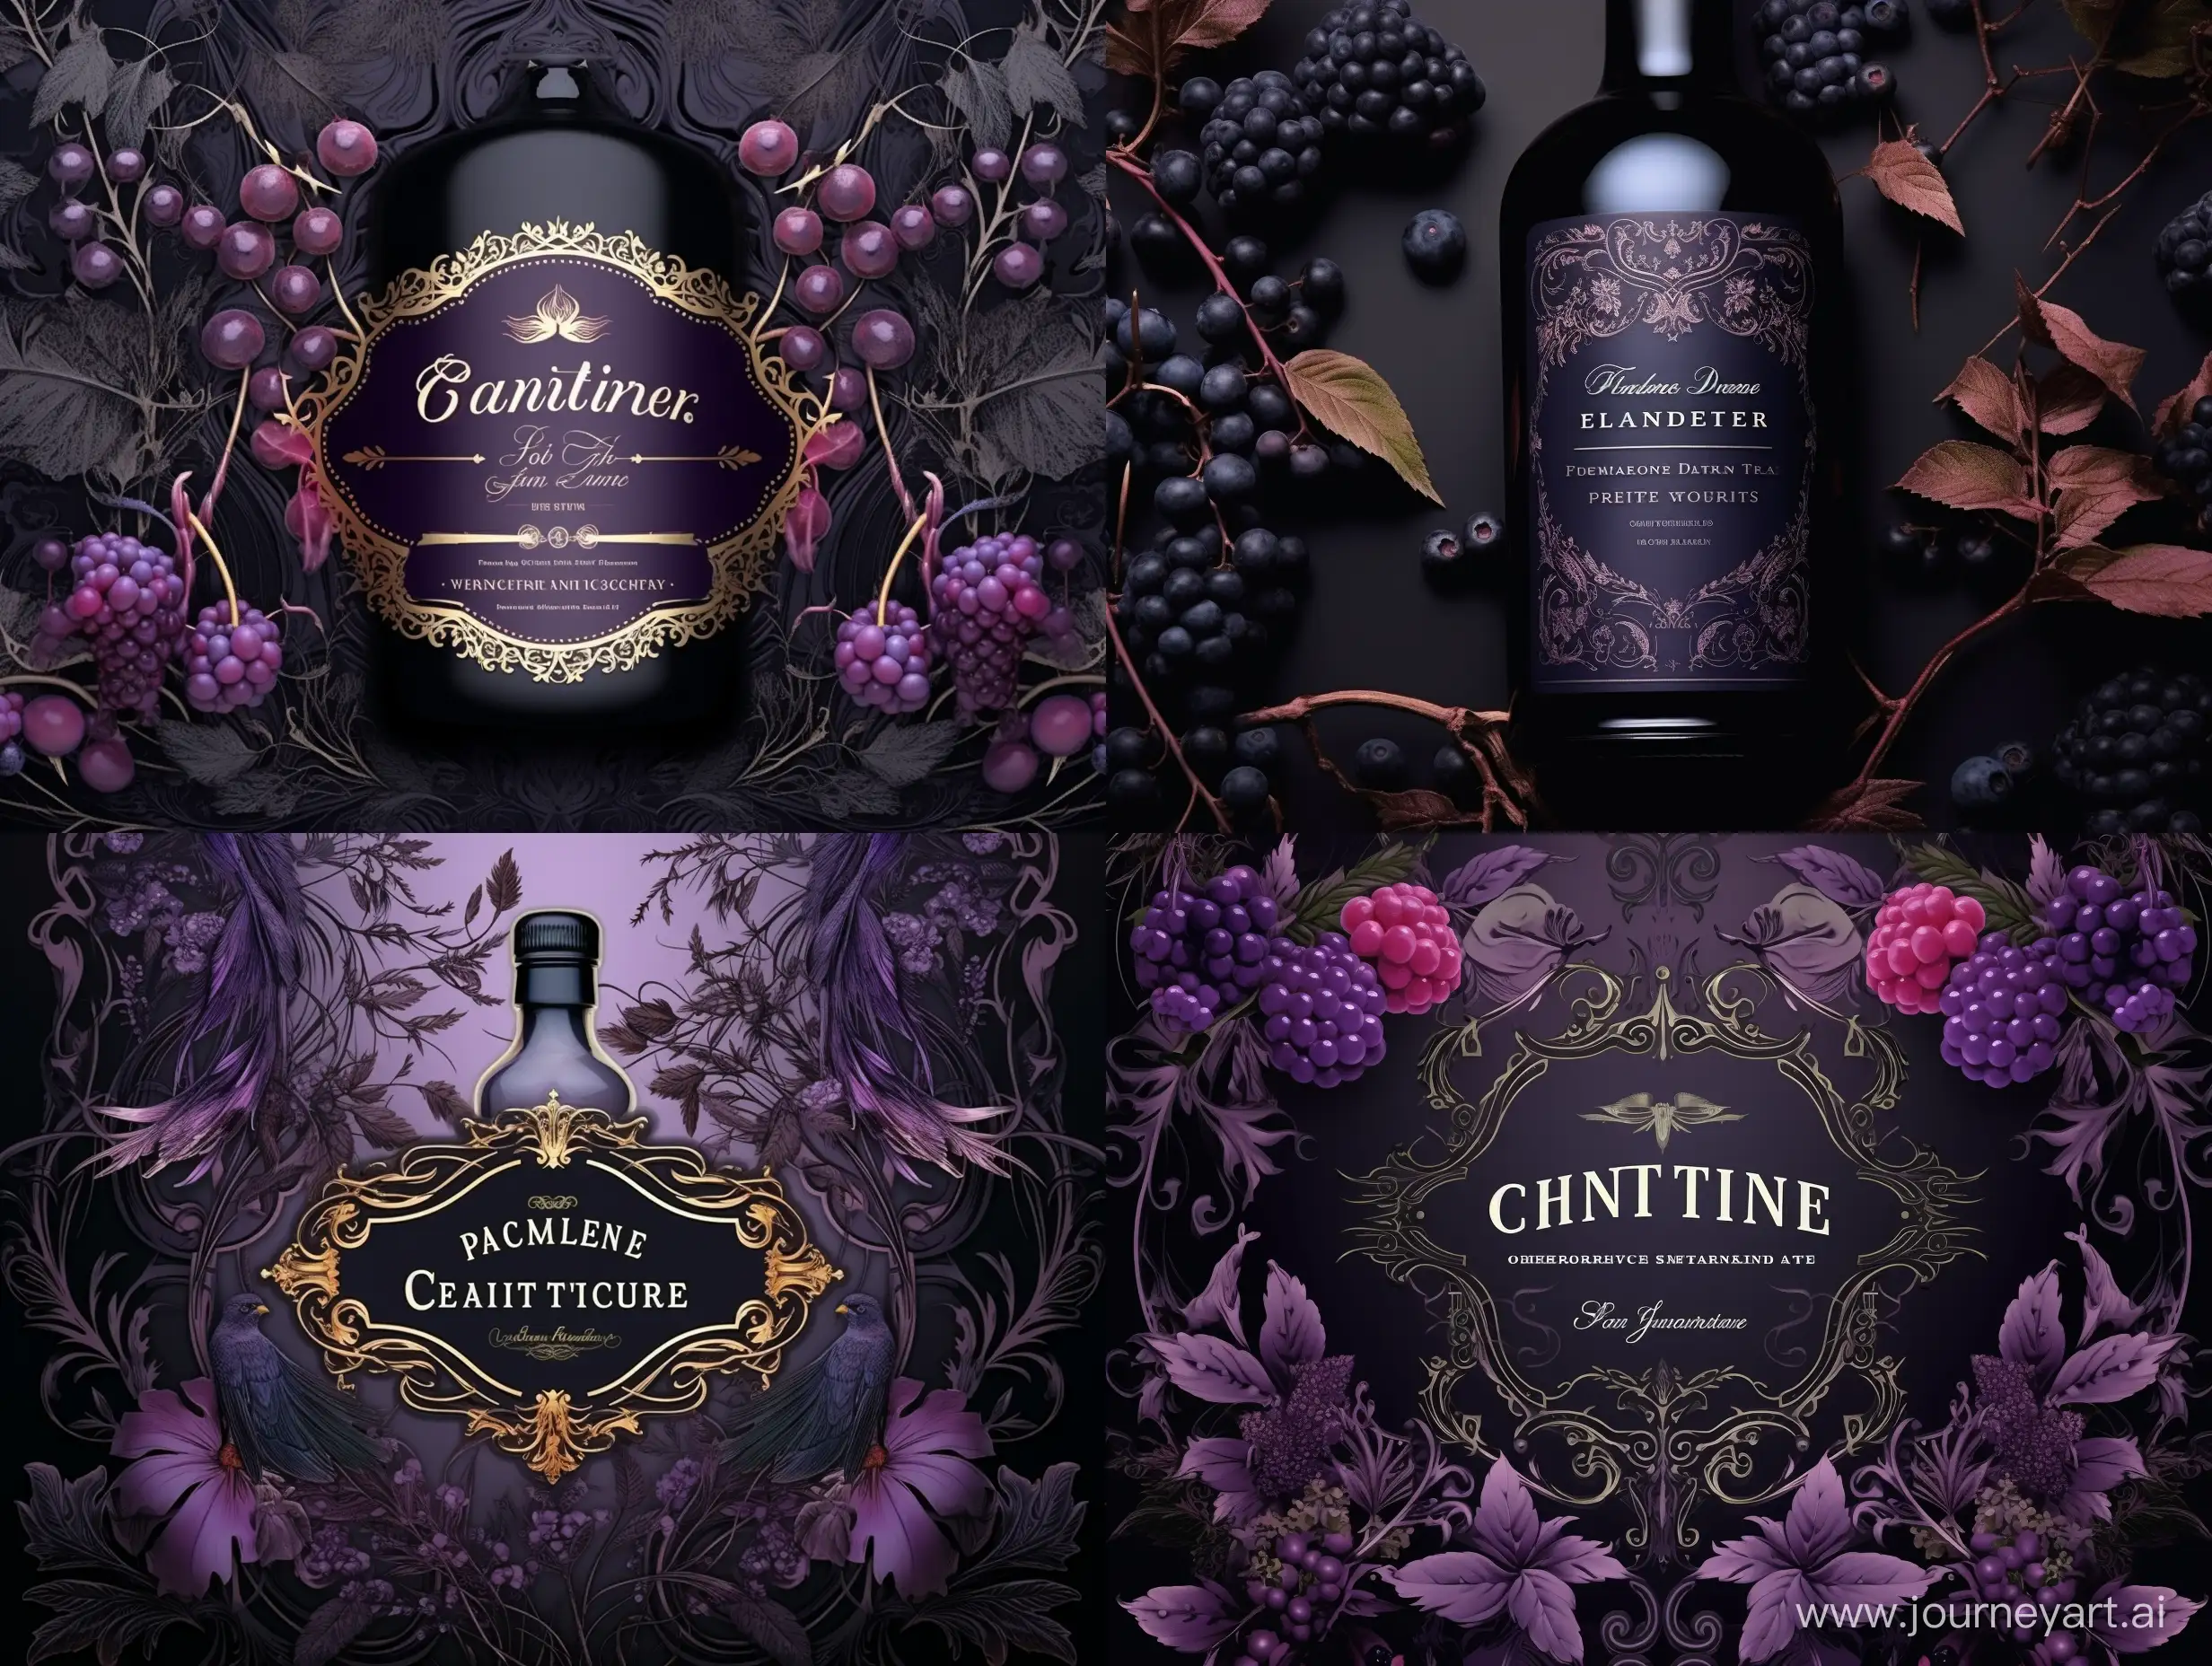 craft liquor label, violette and purple colors, black currant berries and leaves, fantasy gothic style dark shades